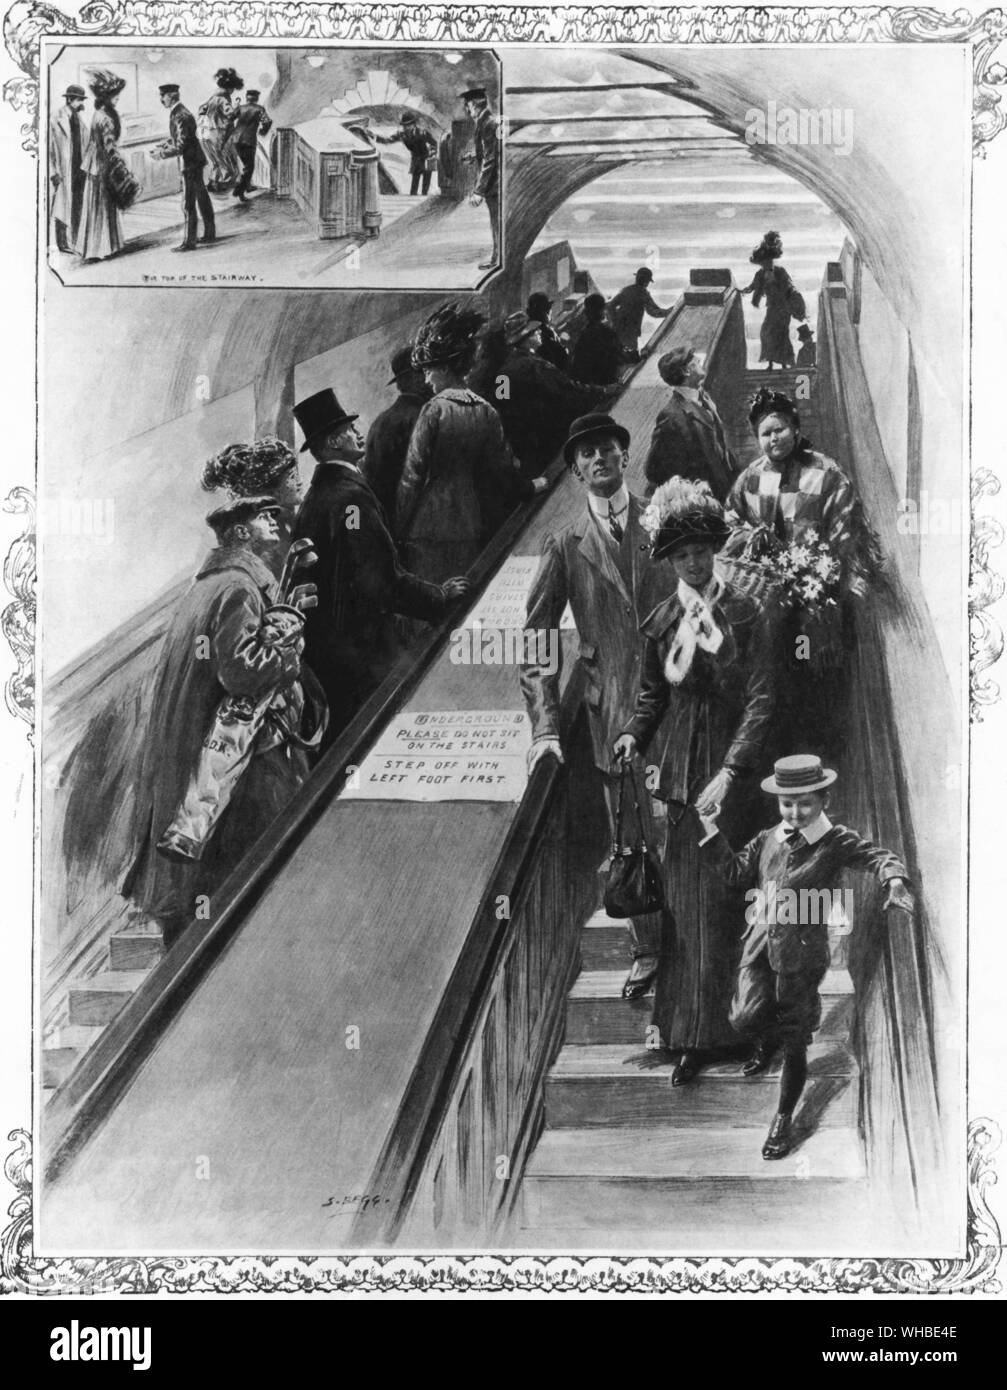 London's new amusement: up and down the escalator 1911 - Please do not sit on the stairs. Step off with left foot first, on the moving staircases at Earl's Court Station.. Stock Photo